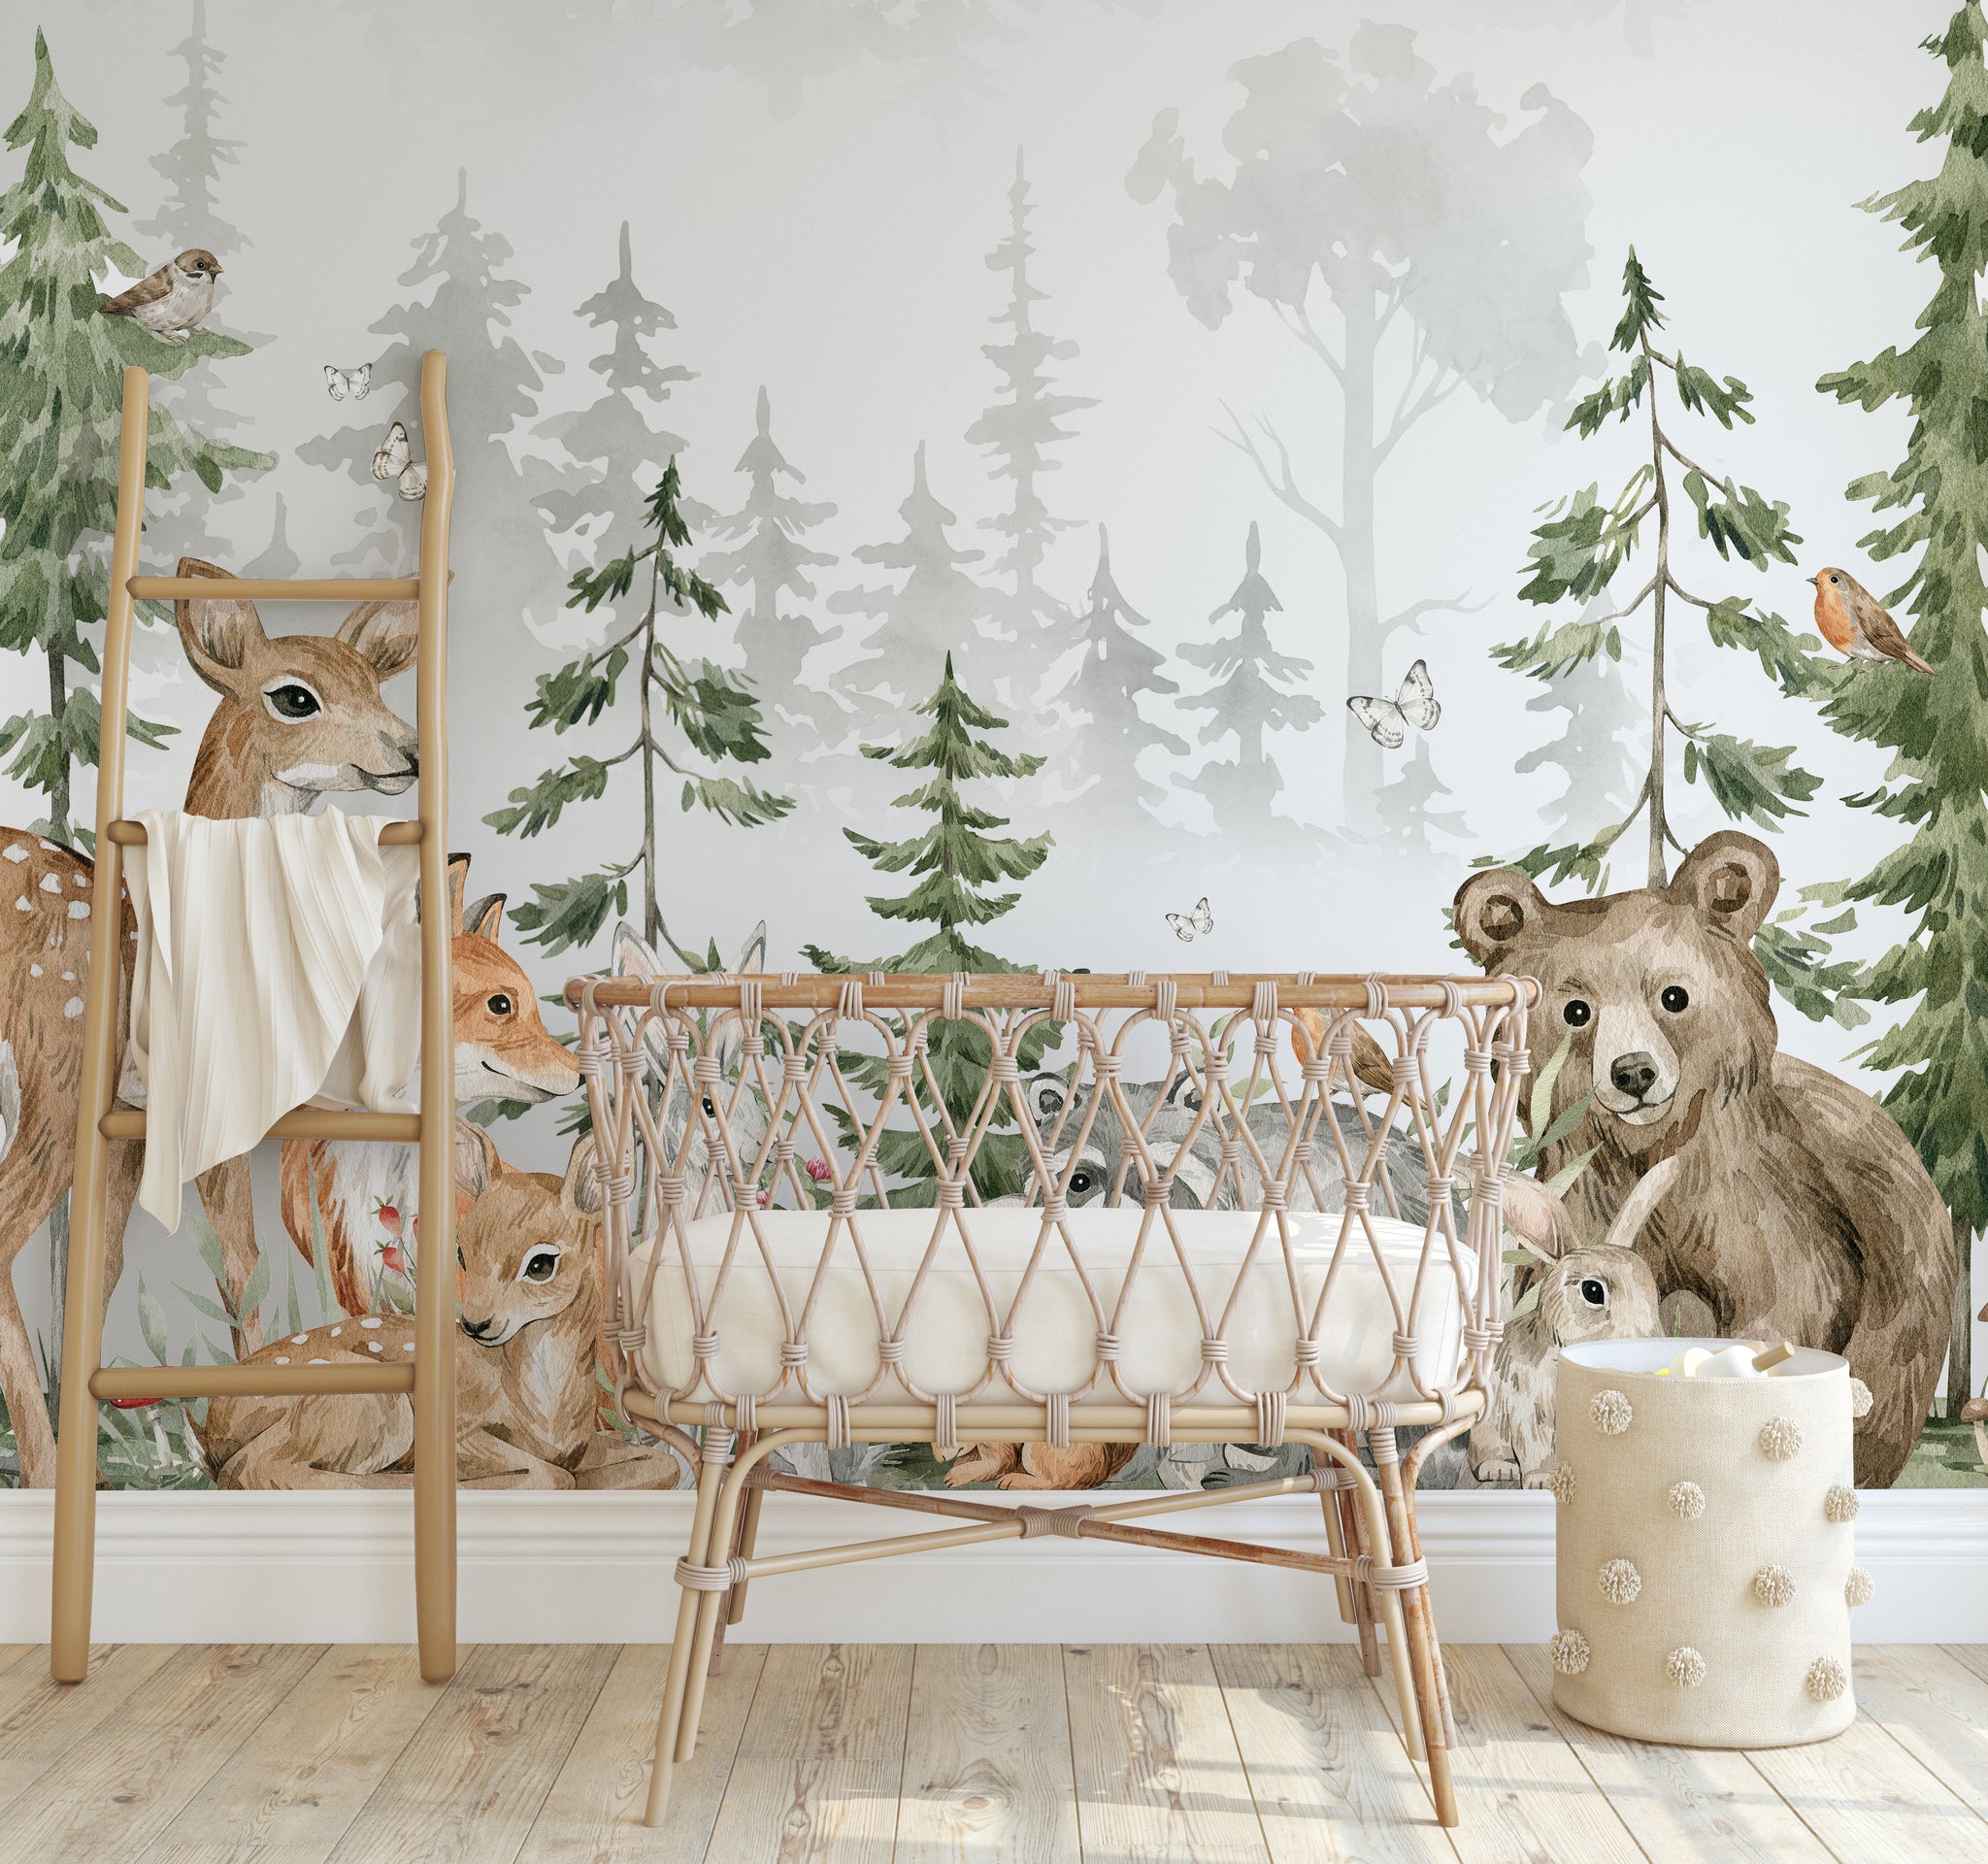 Removable Deer Fawn Woodland Nursery Wallpaper Temporary Peel and Stic   Fireflies Designs